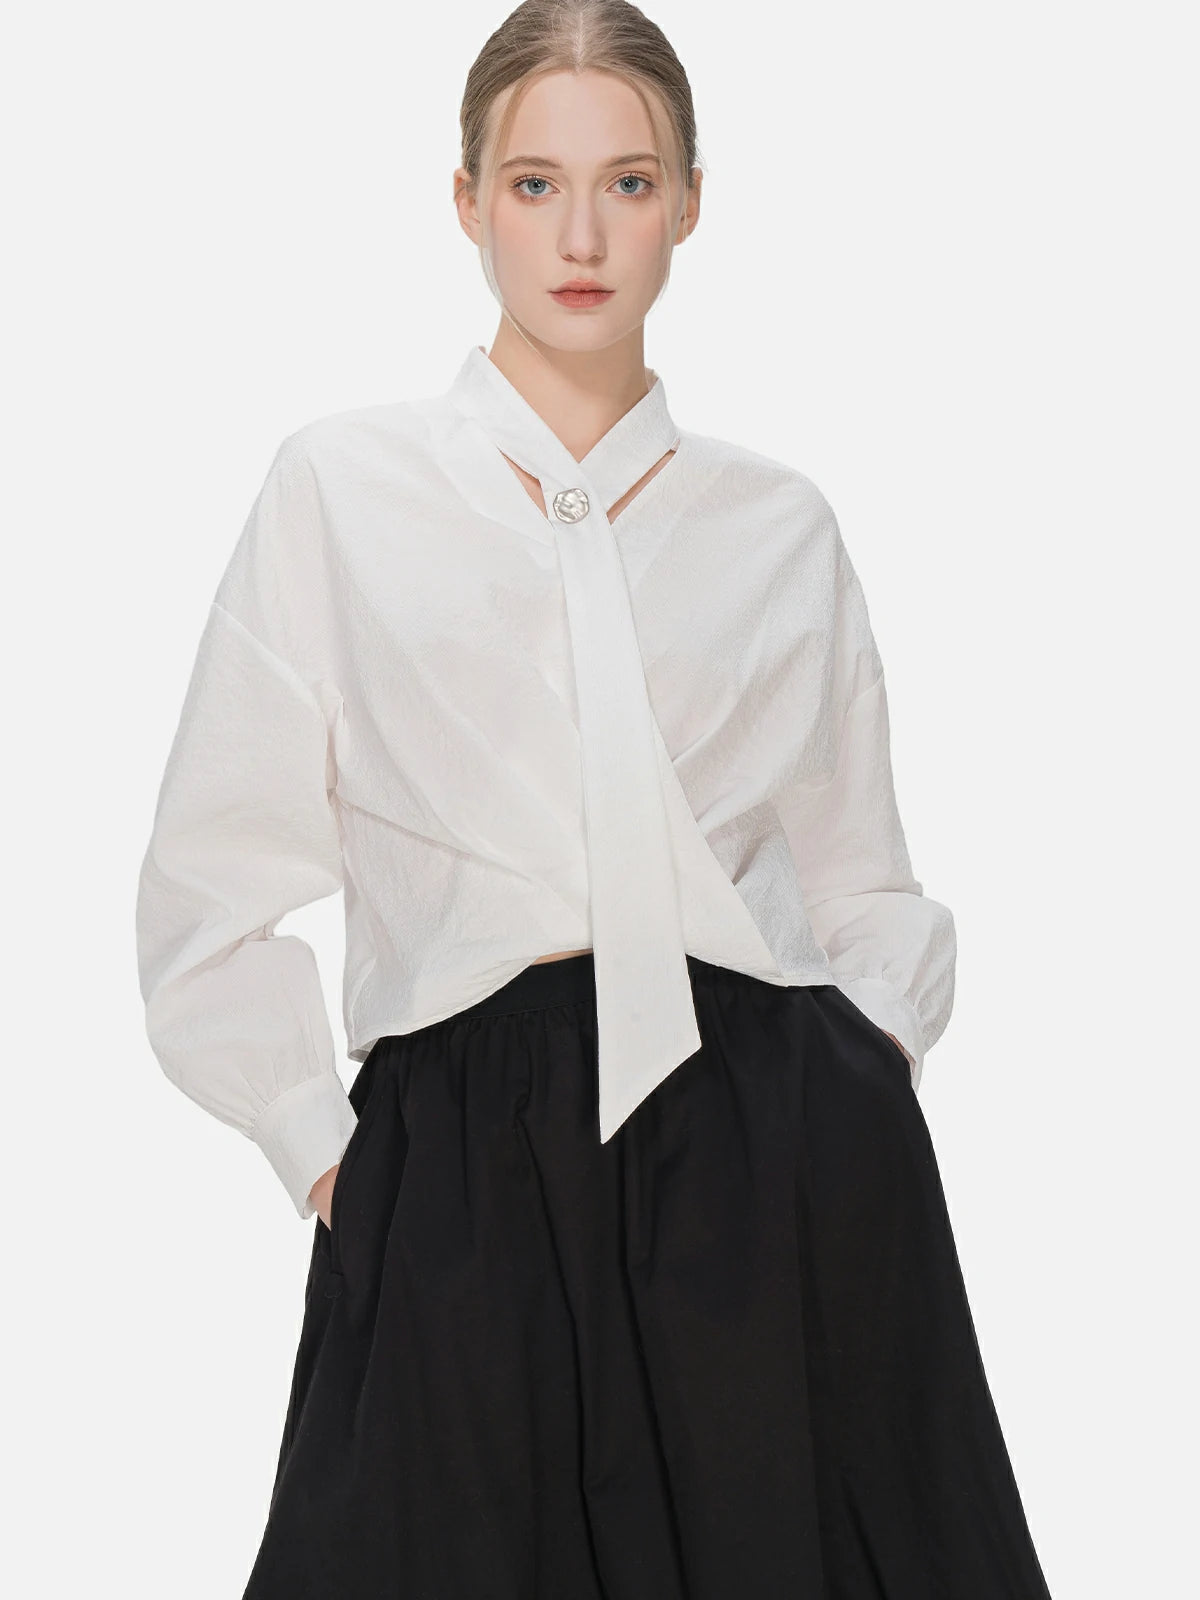 Stylish V-neck blouse with cascading ribbons, featuring a modern and elegant cross-pleat design for a uniquely charming appearance.